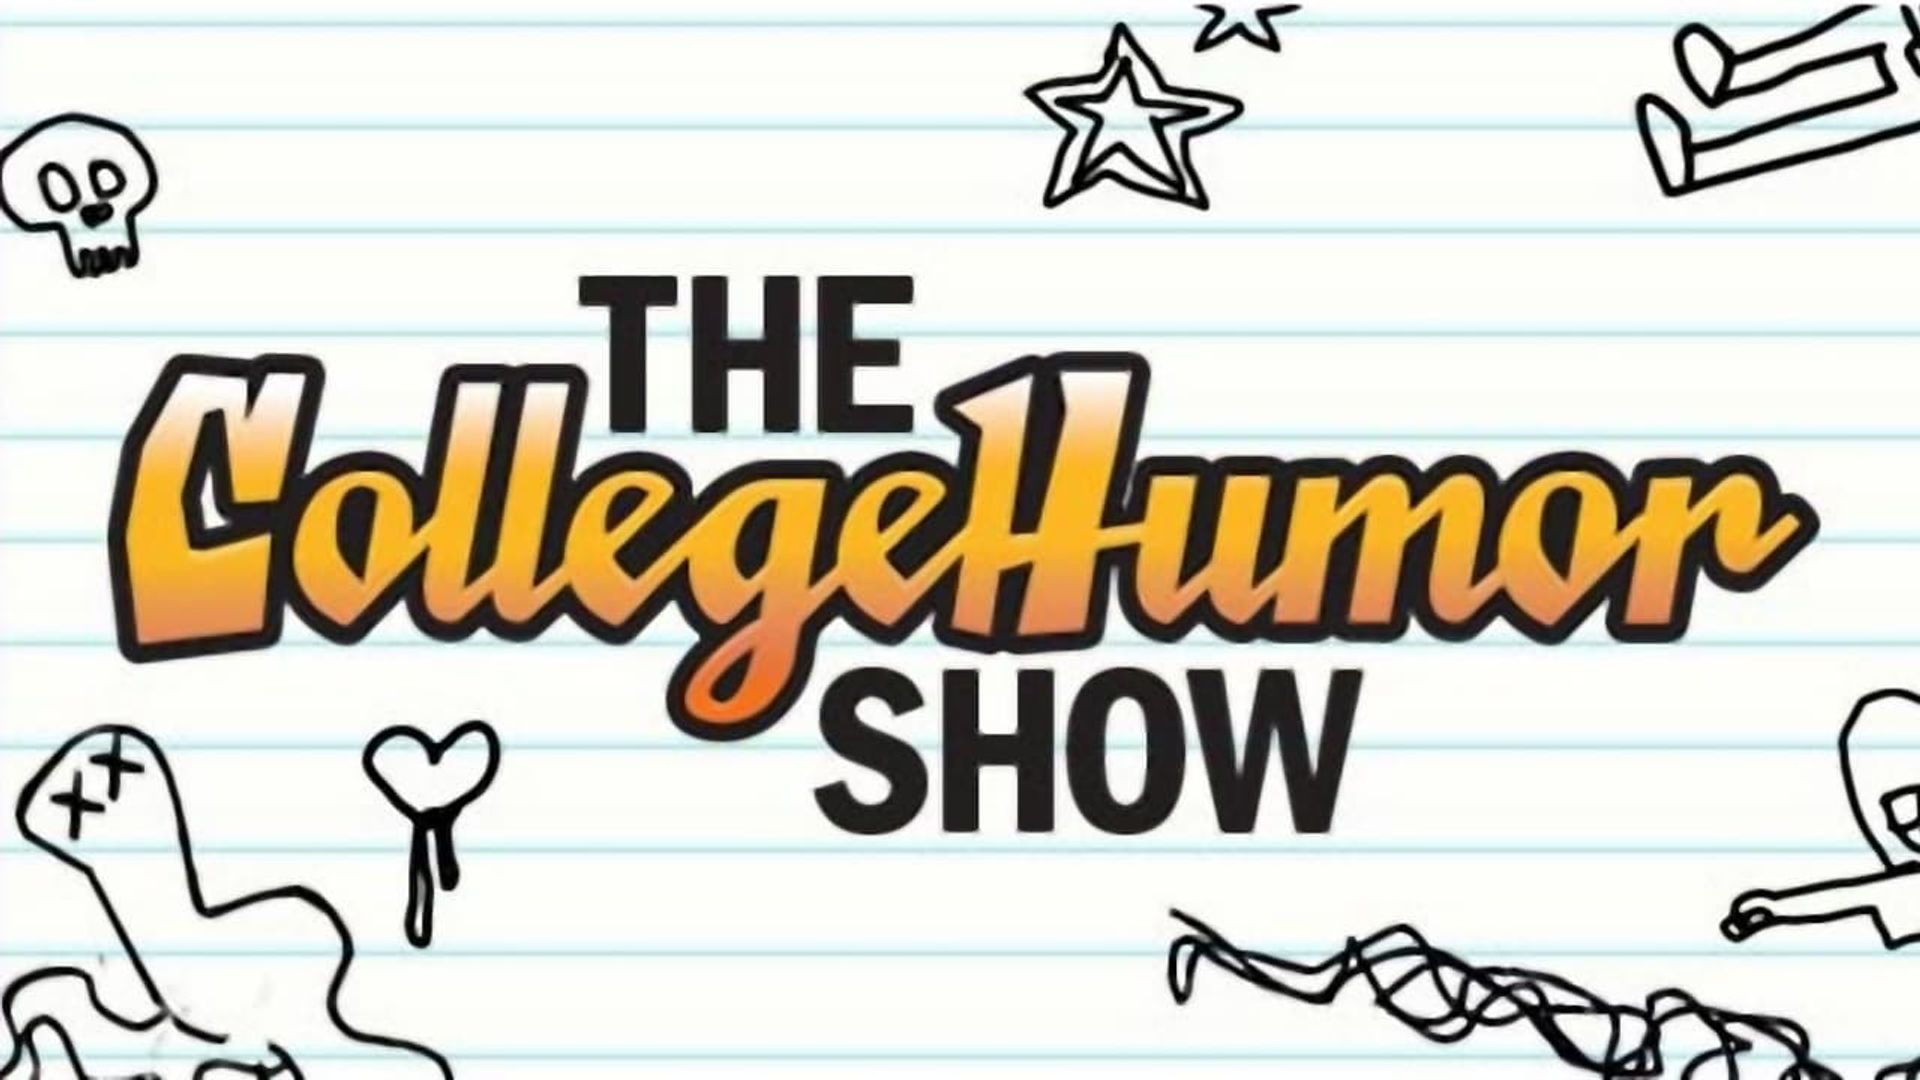 The CollegeHumor Show background